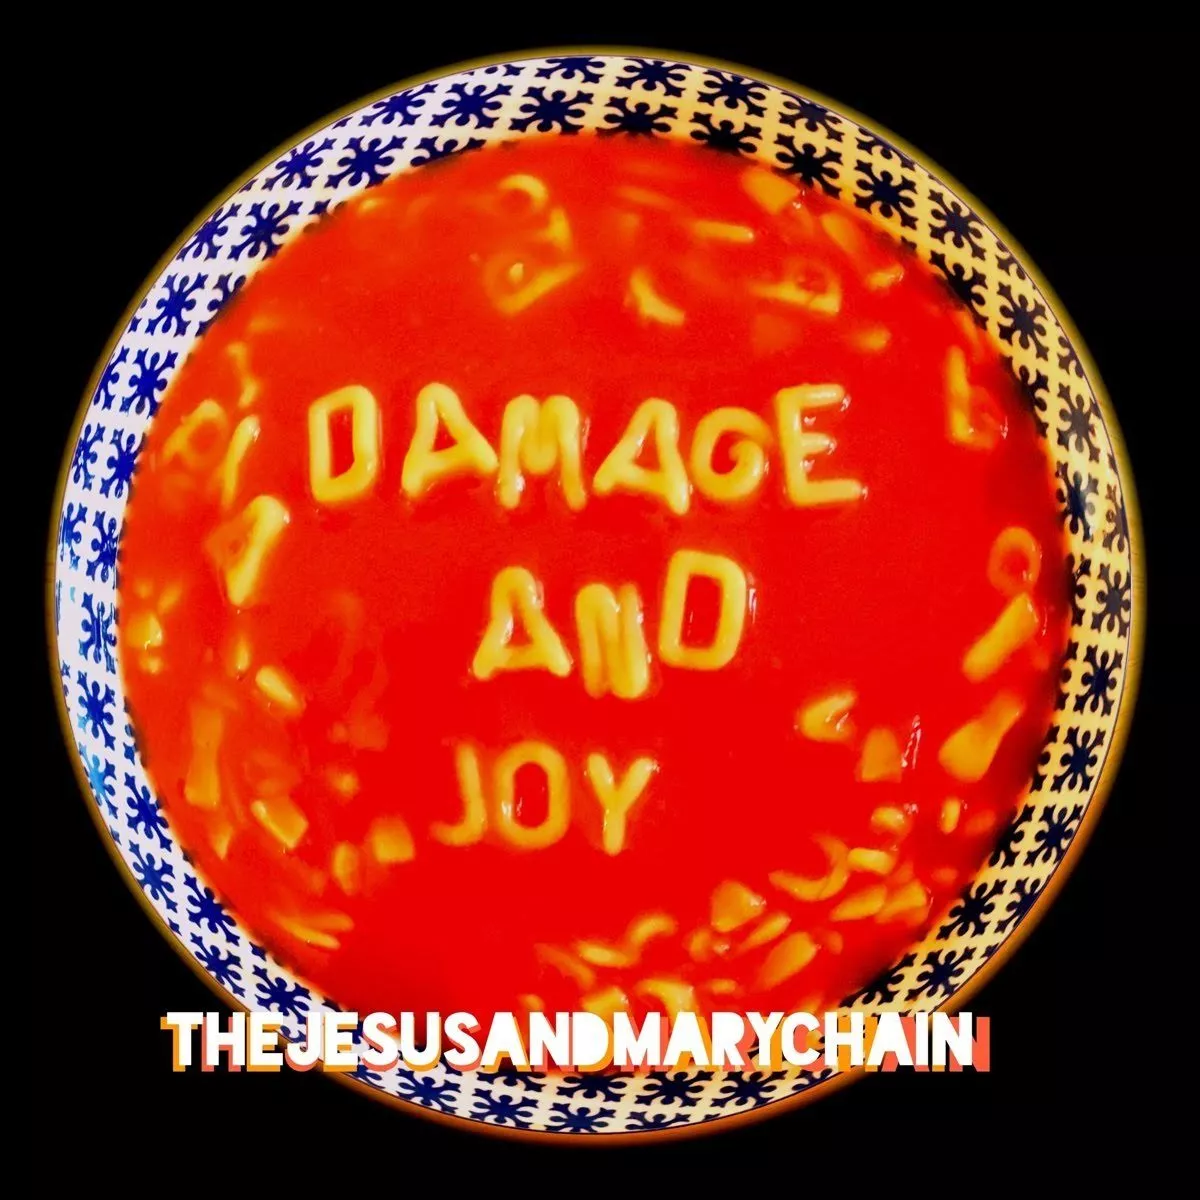 Damage And Joy - The Jesus & Mary Chain